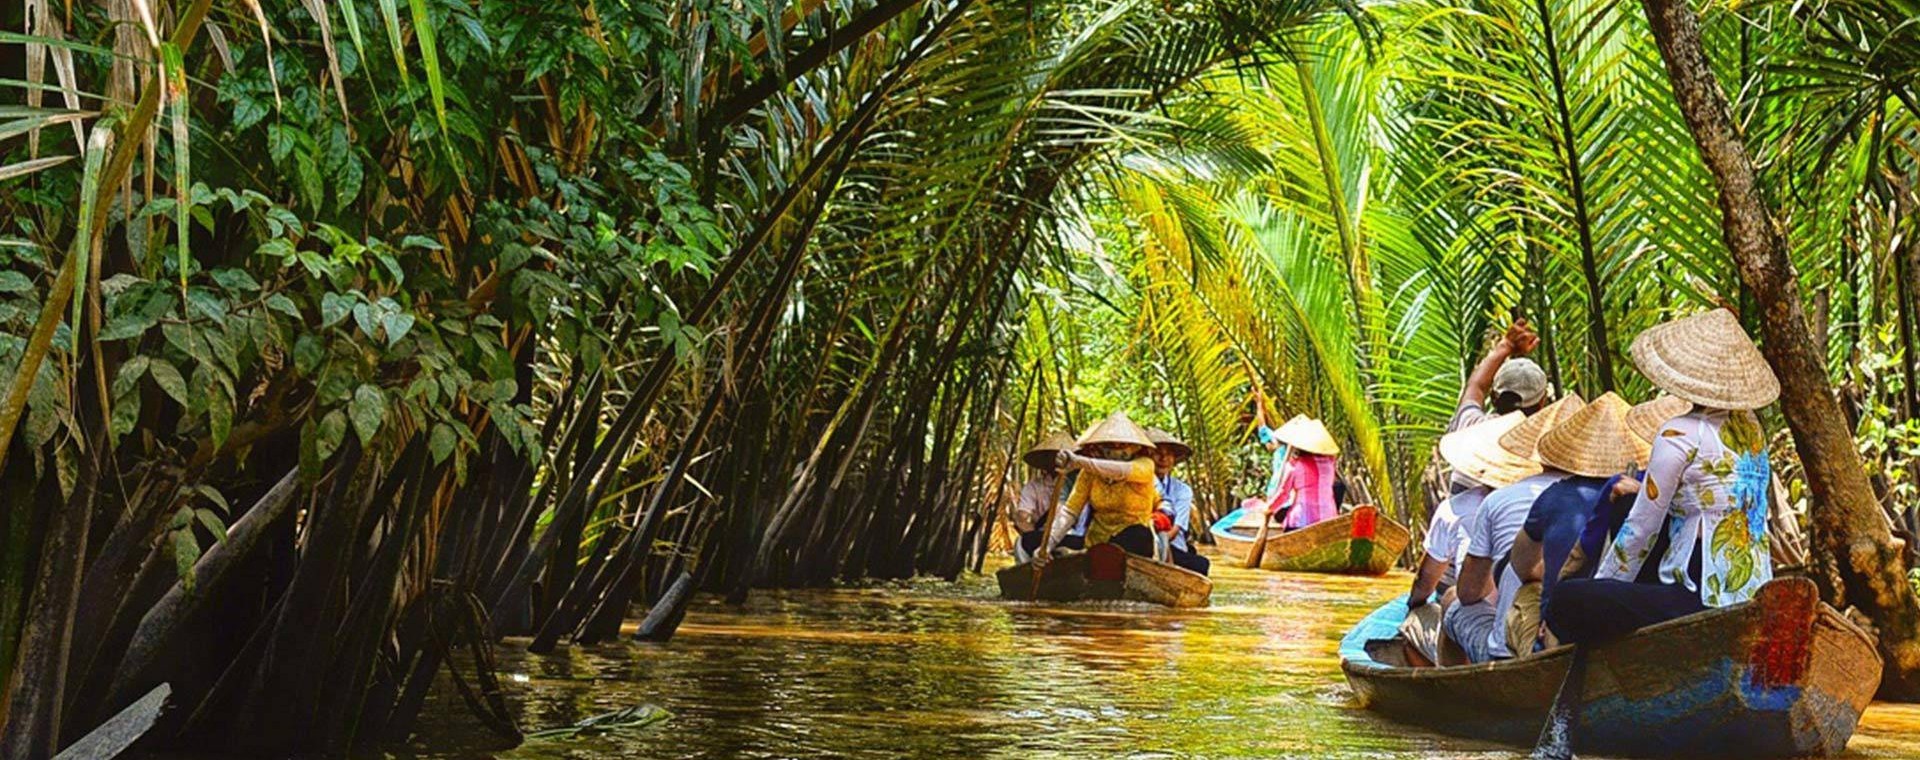 A DAY TRIP TO BEN TRE - THE LESS TOURISTY TOWN IN THE MEKONG DELTA